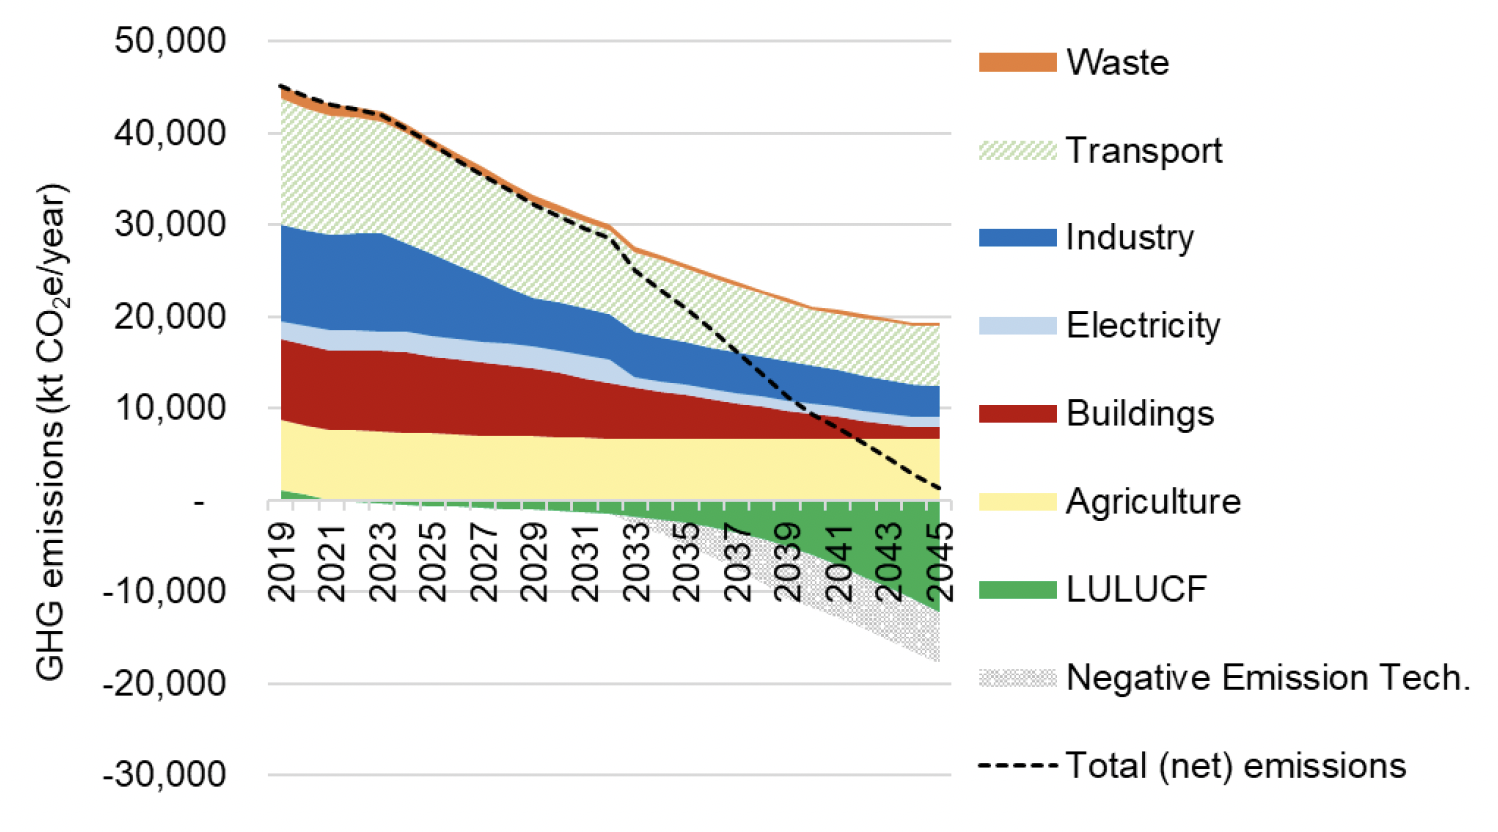  A line and area graph showing the overall reductions in emissions with the share for each sector.